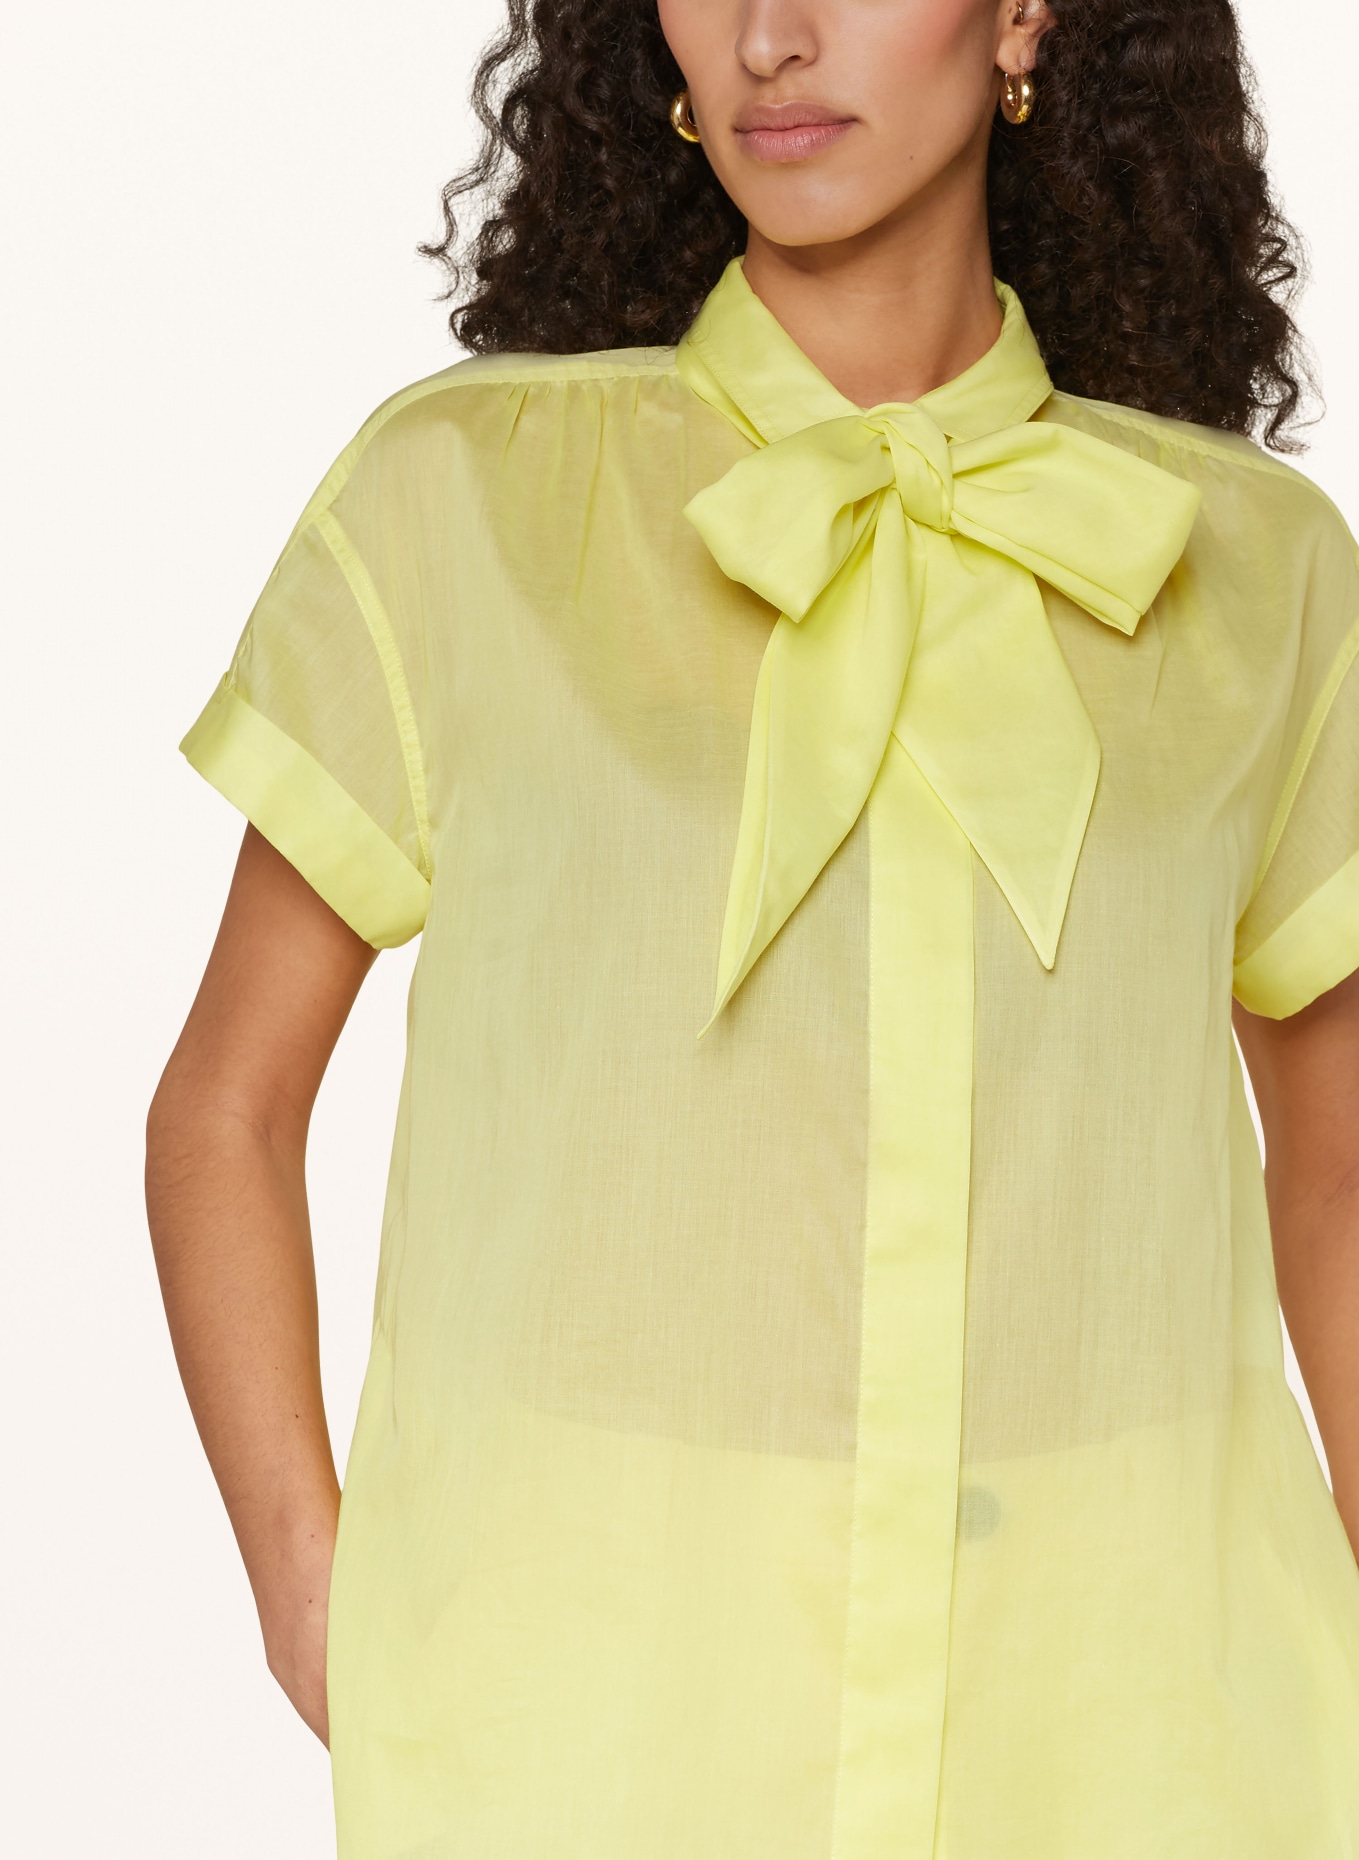 windsor. Blouse with detachable bow tie, Color: YELLOW (Image 4)